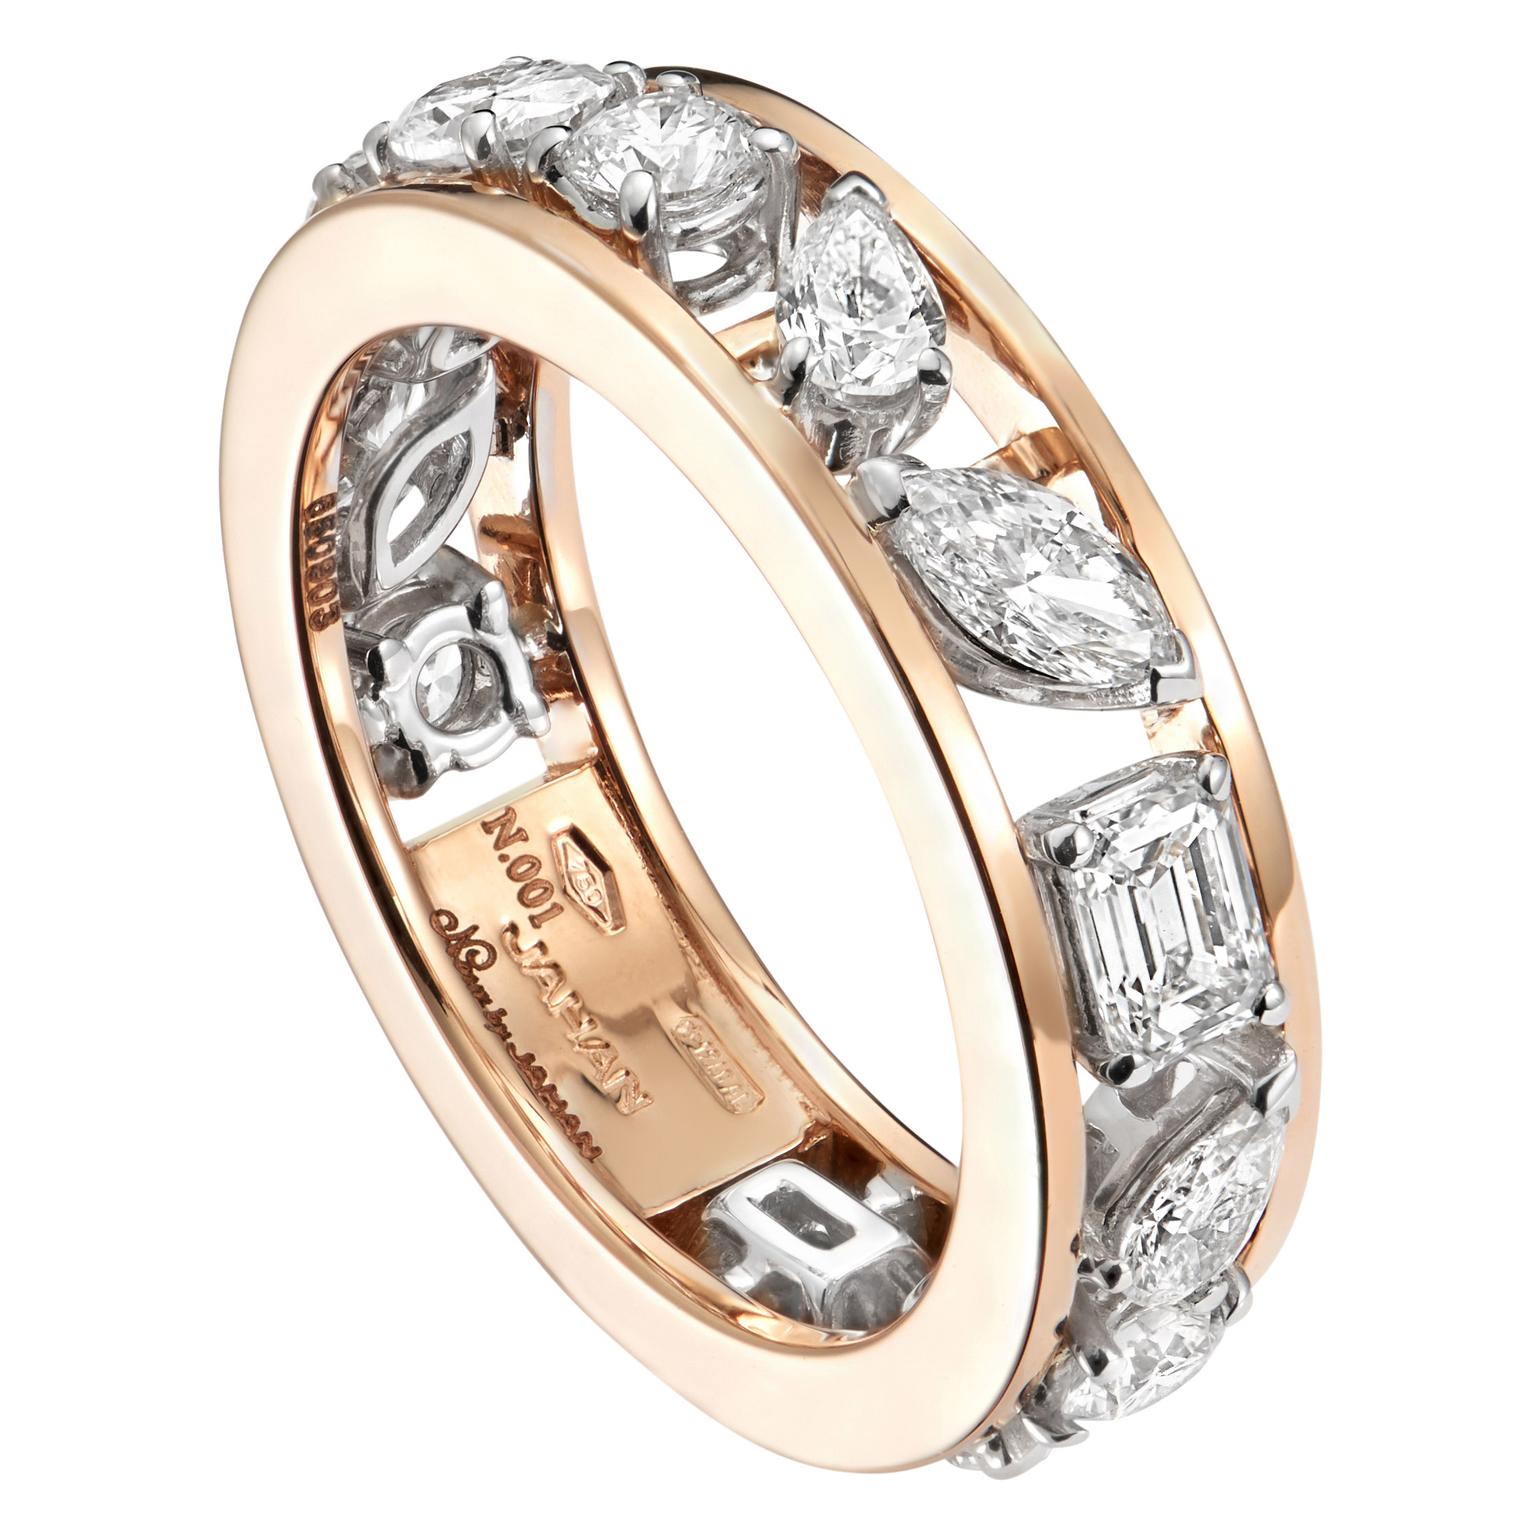 Nour By Jahan  Ring from the Jolie Collection